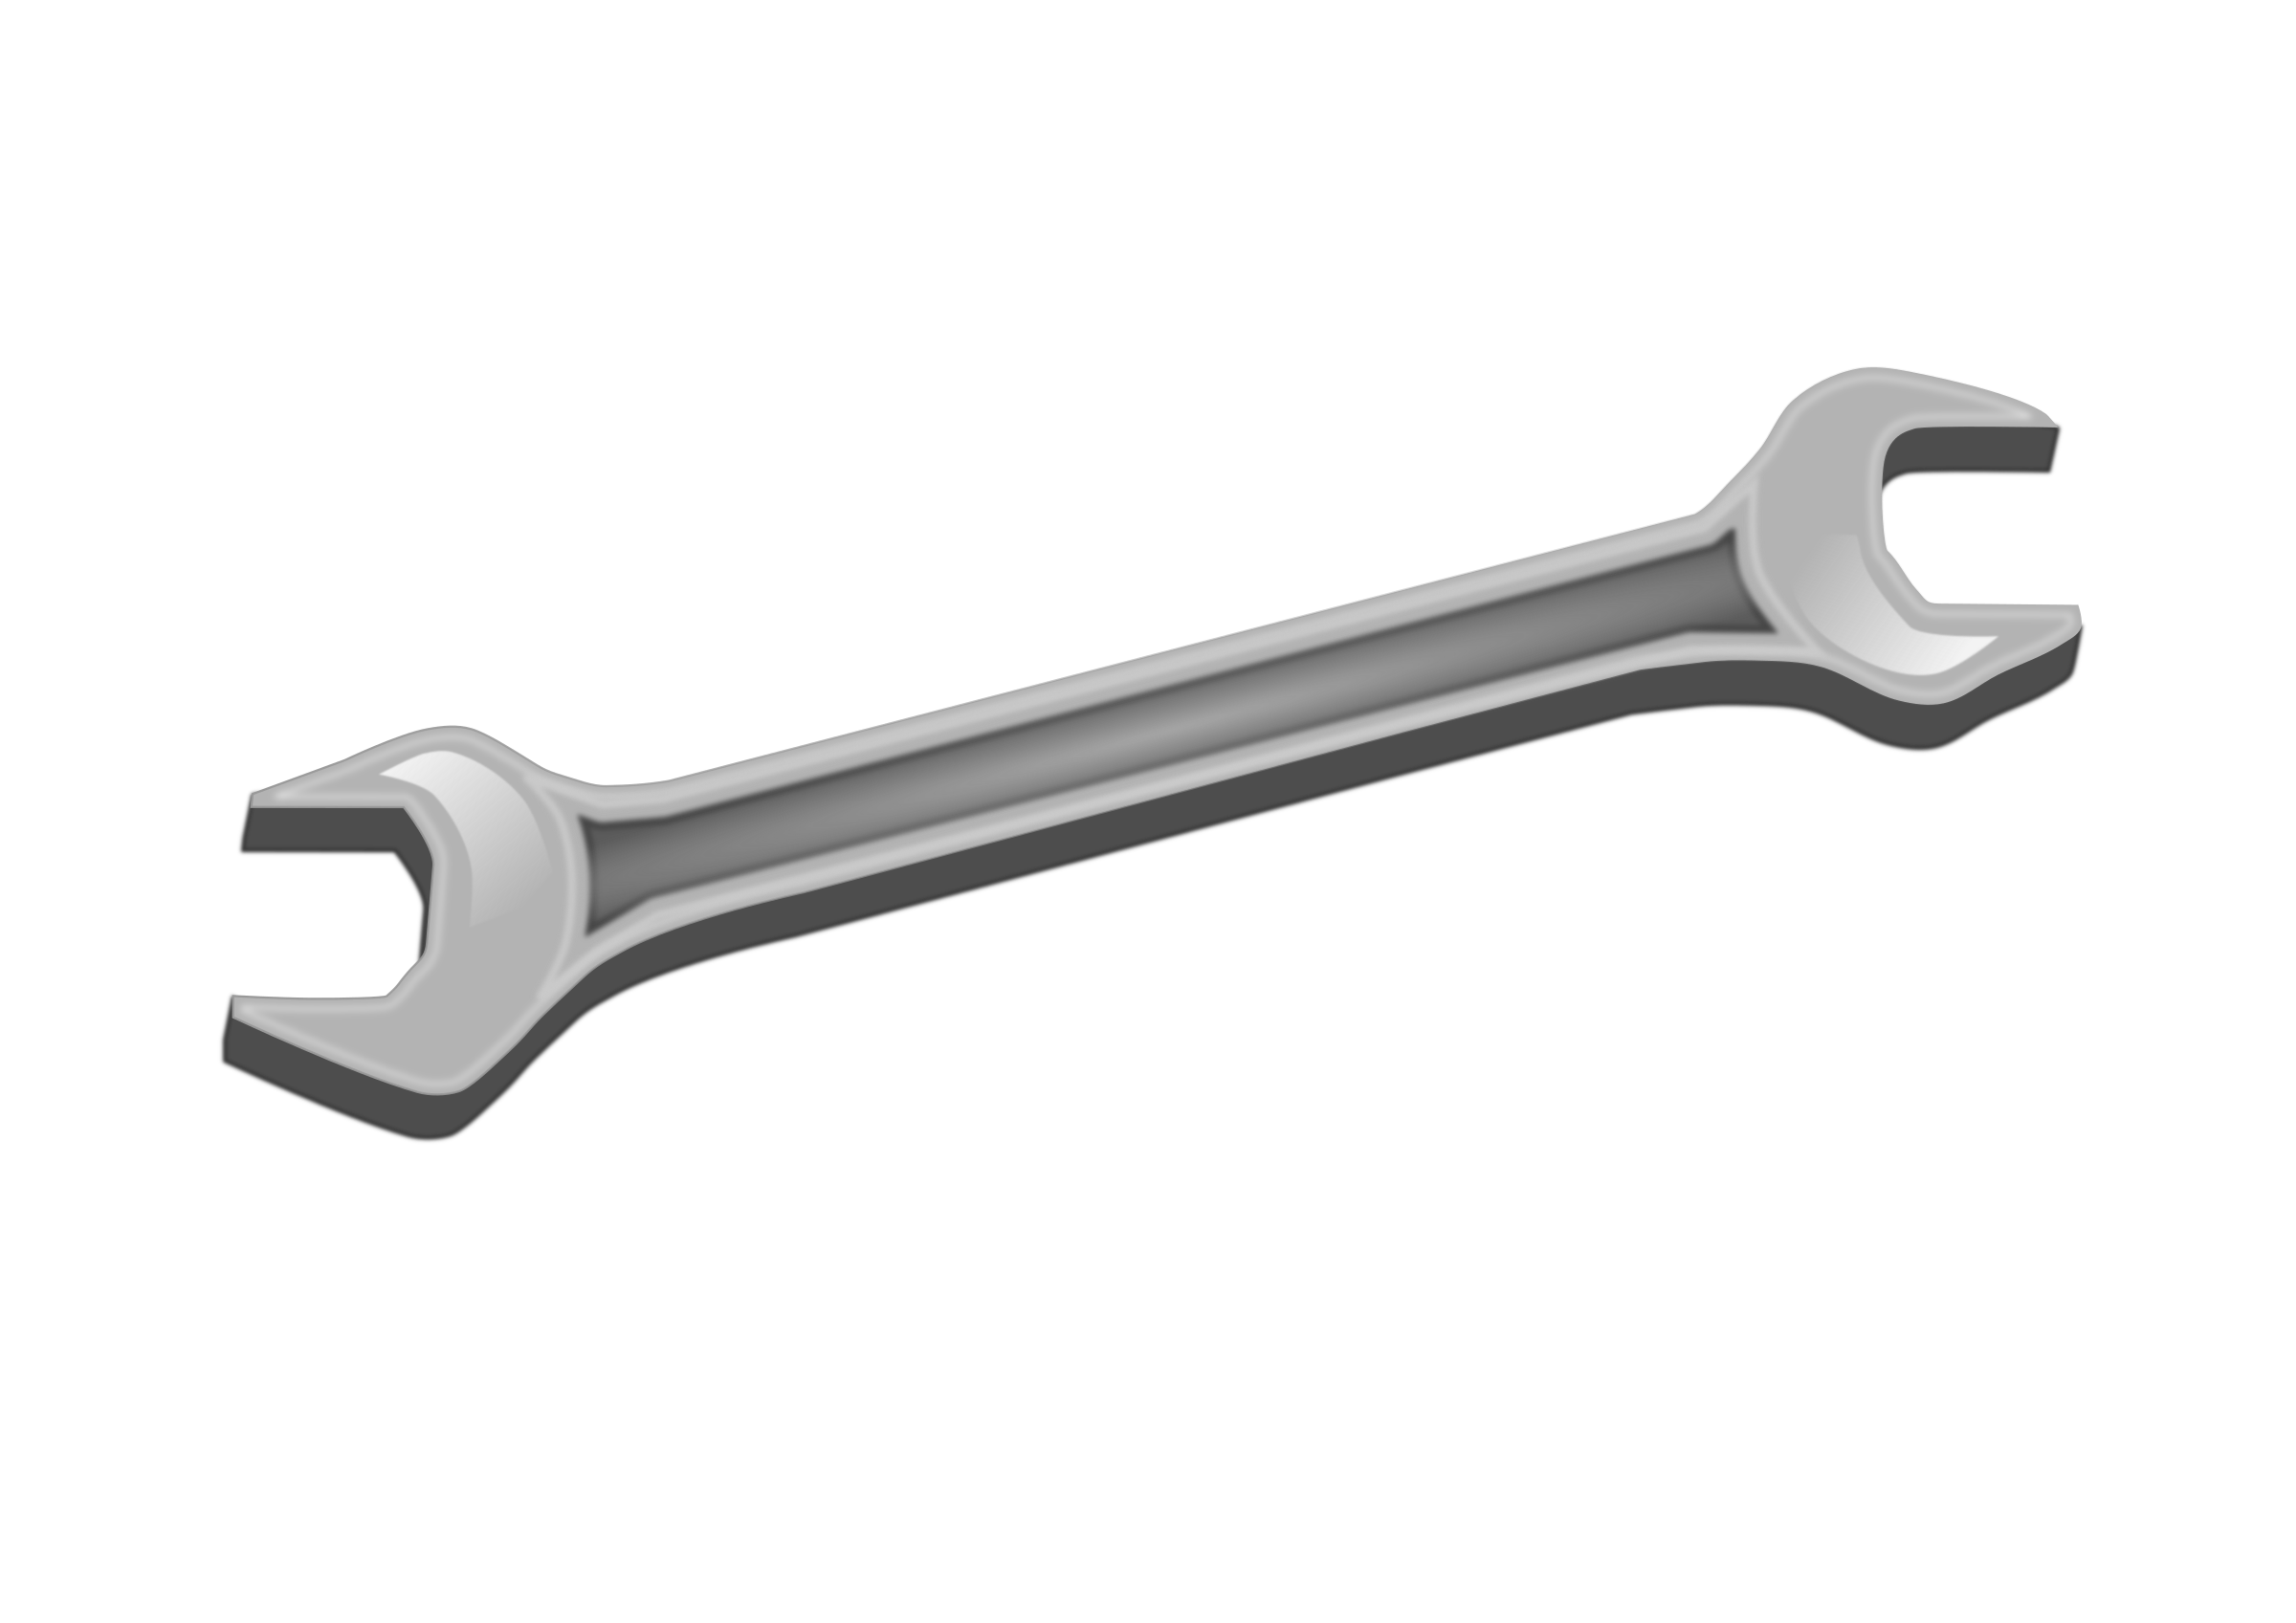 Big image png. White clipart wrench